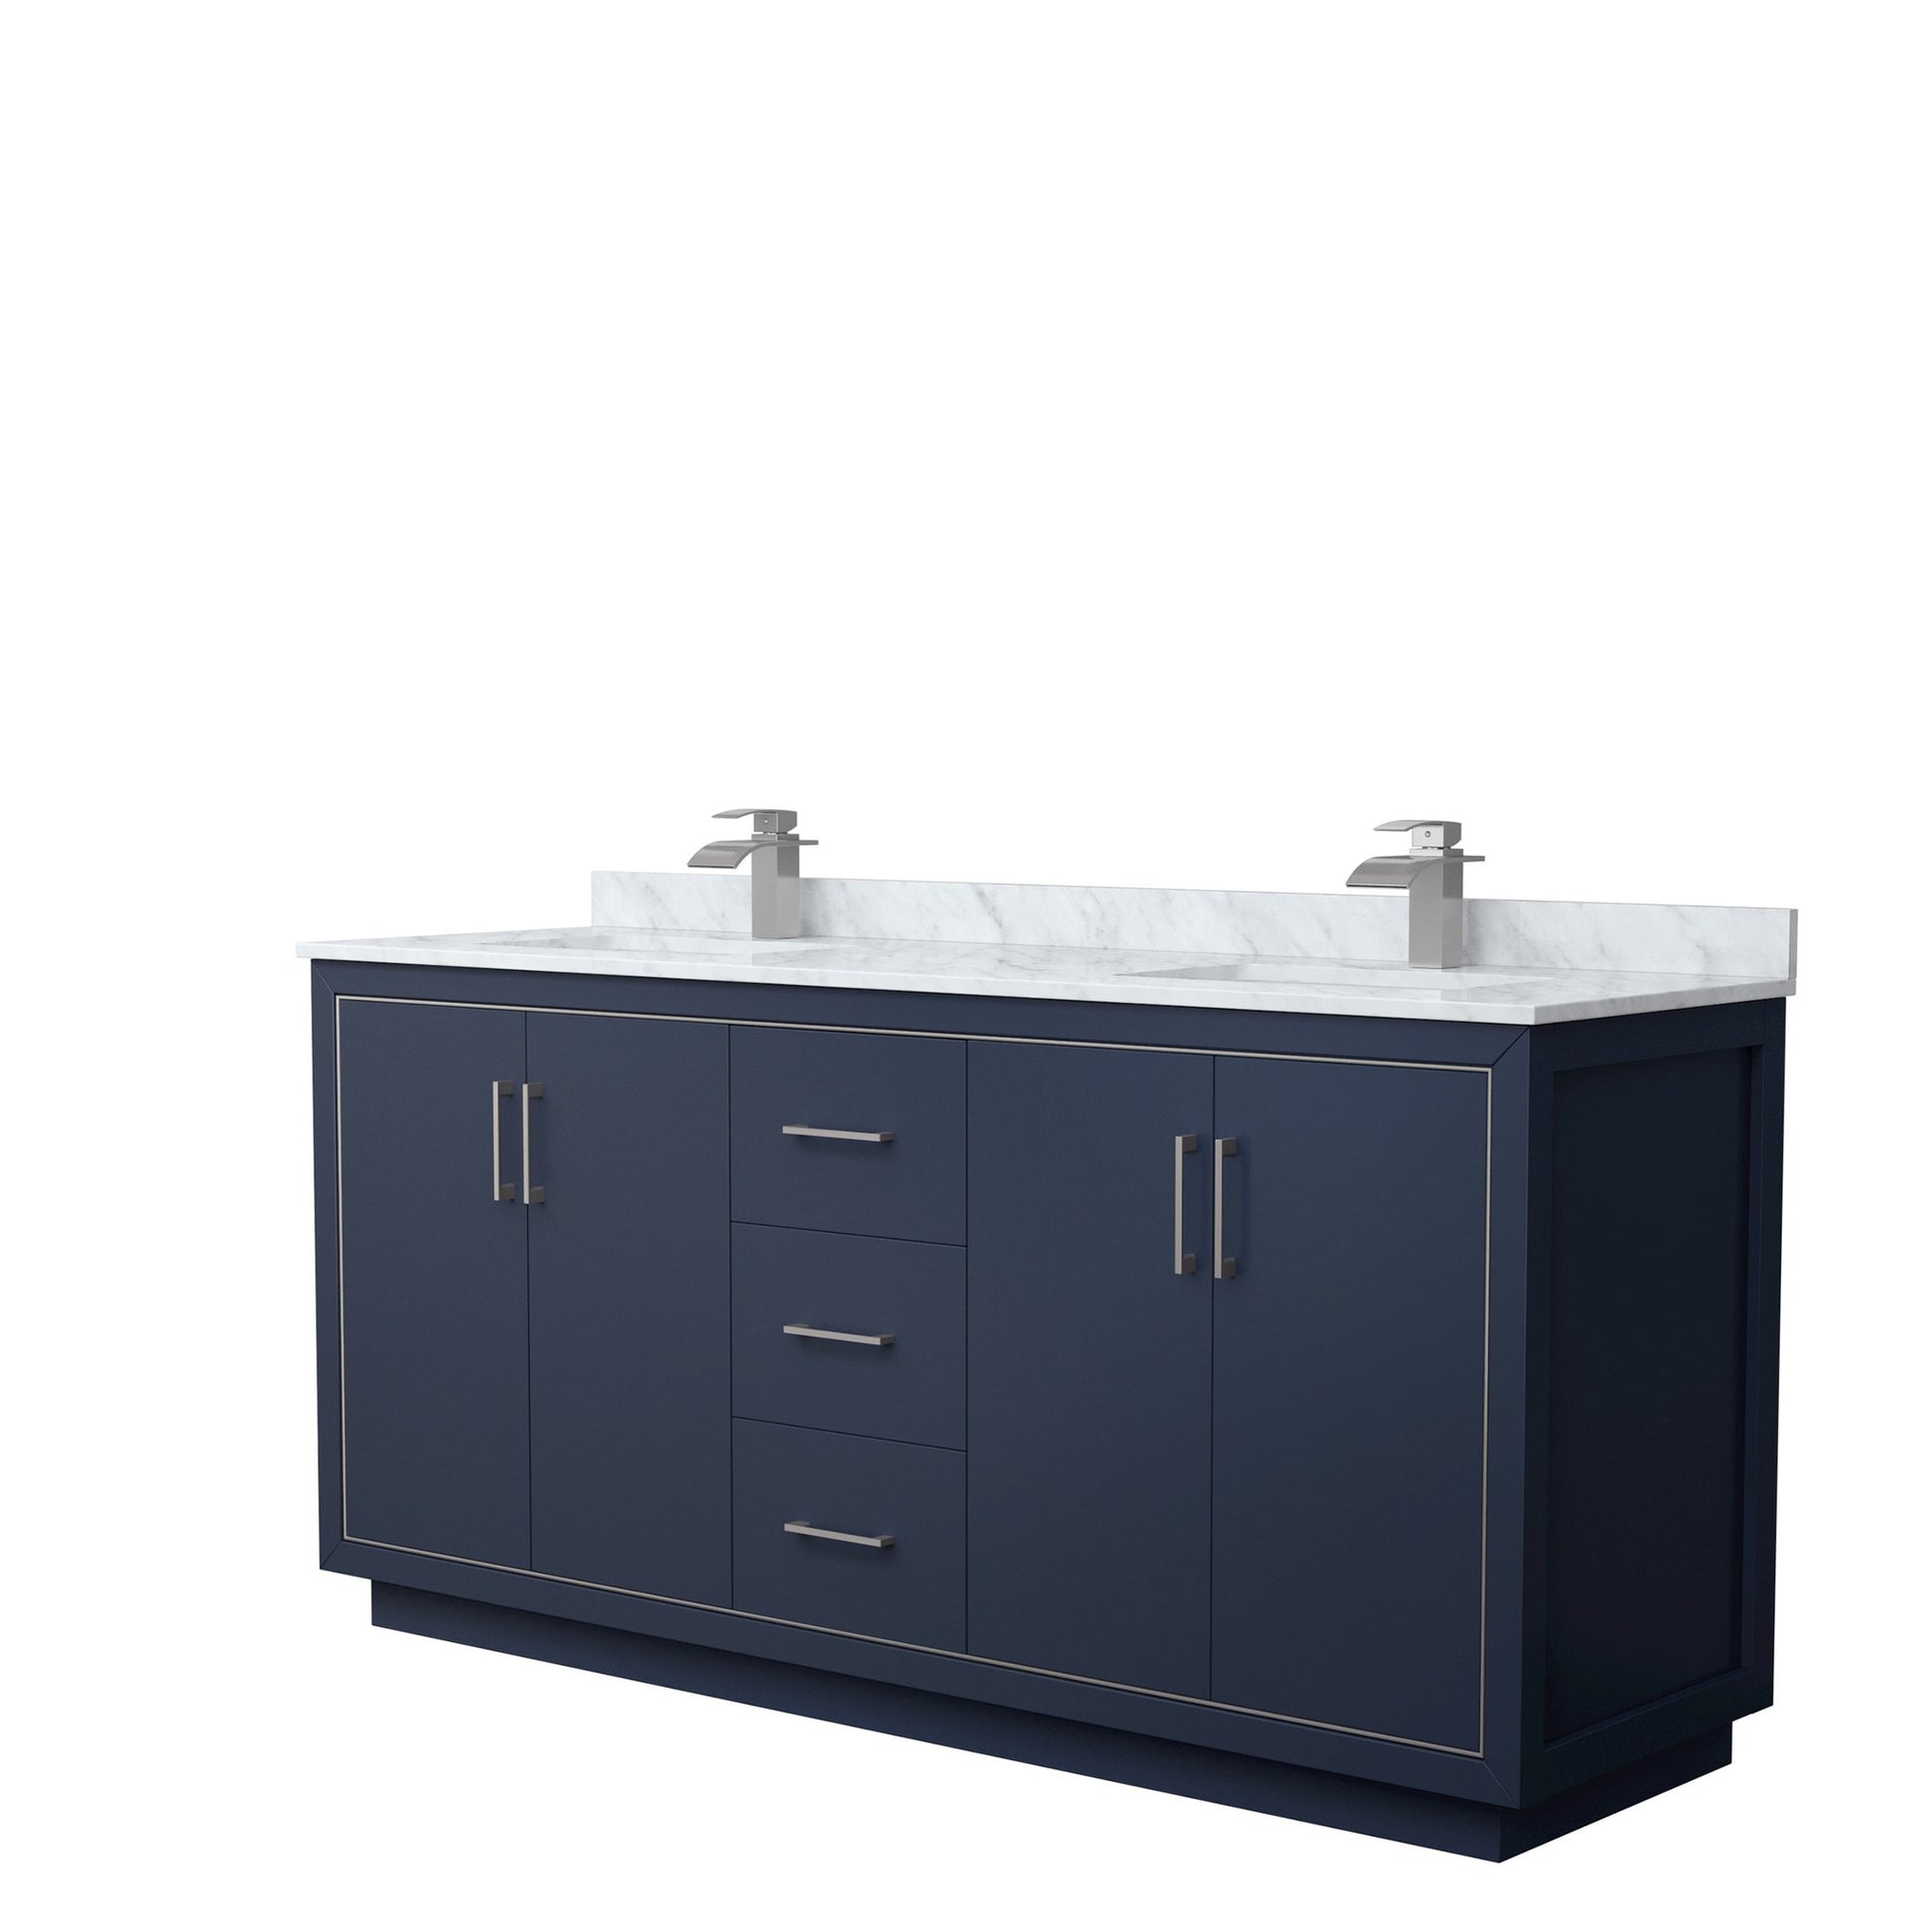 Wyndham Collection Icon 72" Double Bathroom Vanity in Dark Blue, White Carrara Marble Countertop, Undermount Square Sinks, Brushed Nickel Trim